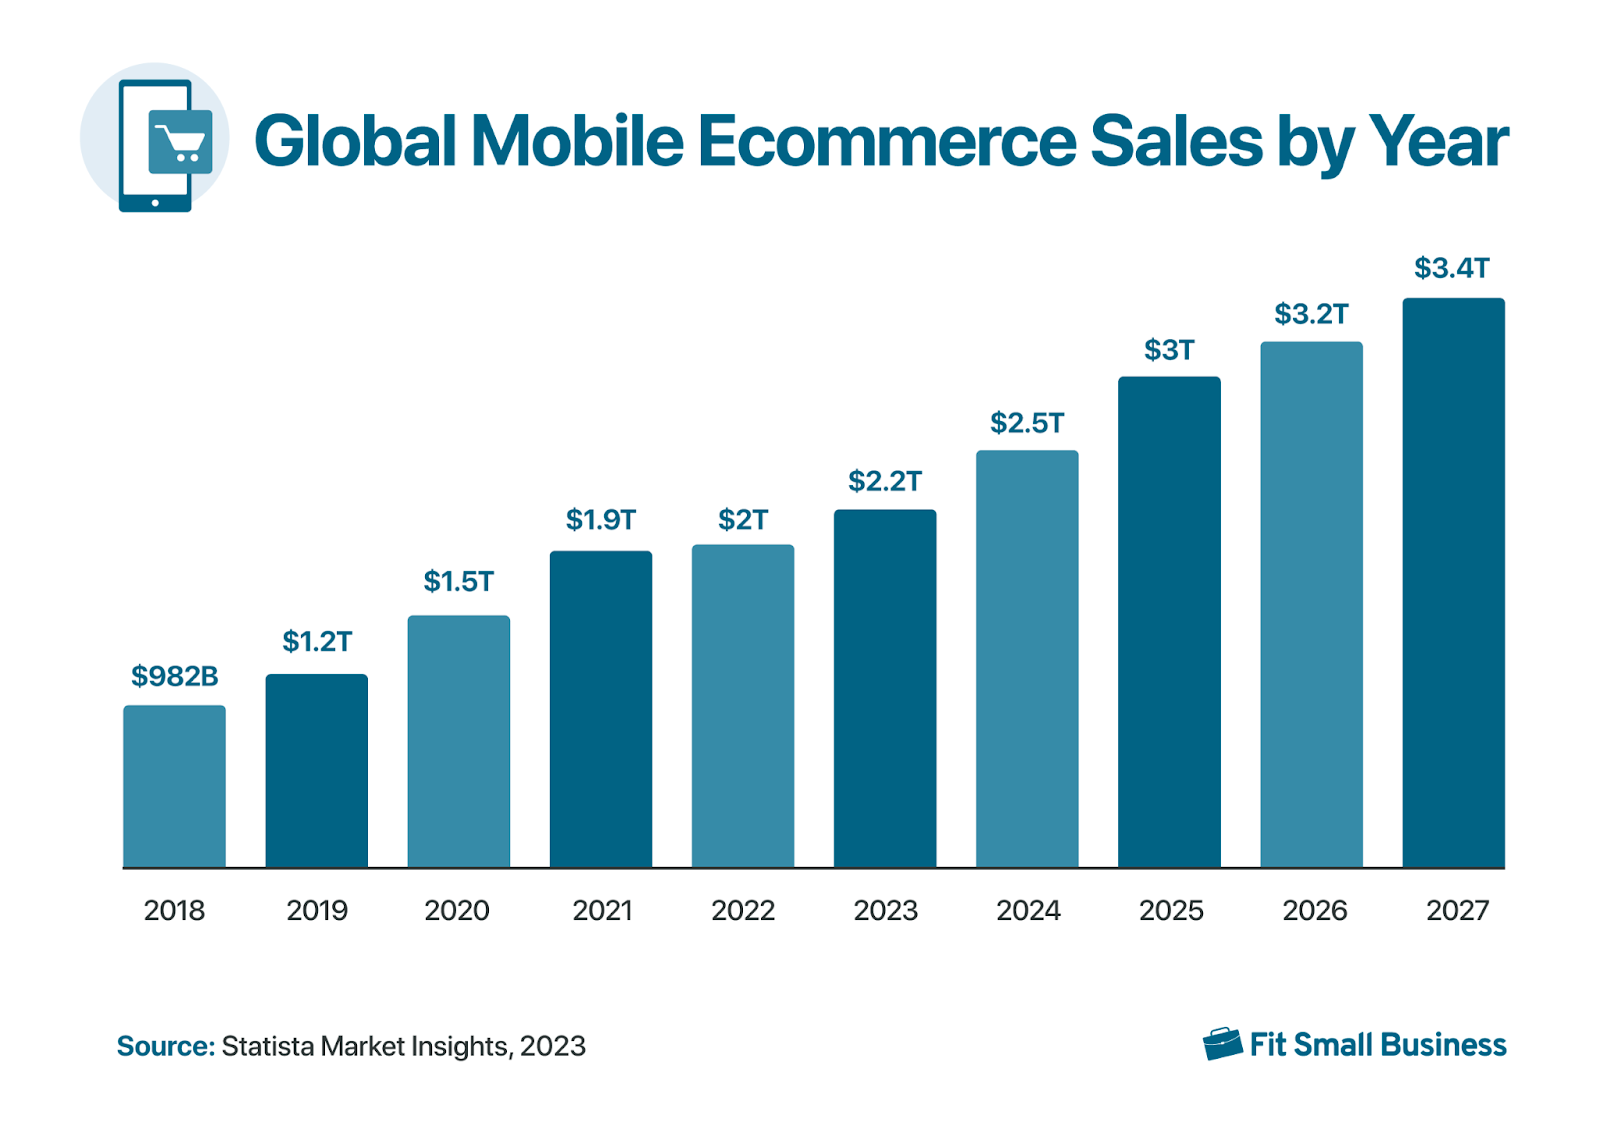 A bar graph showing global mobile commerce sales by year from 2018 to 2027.